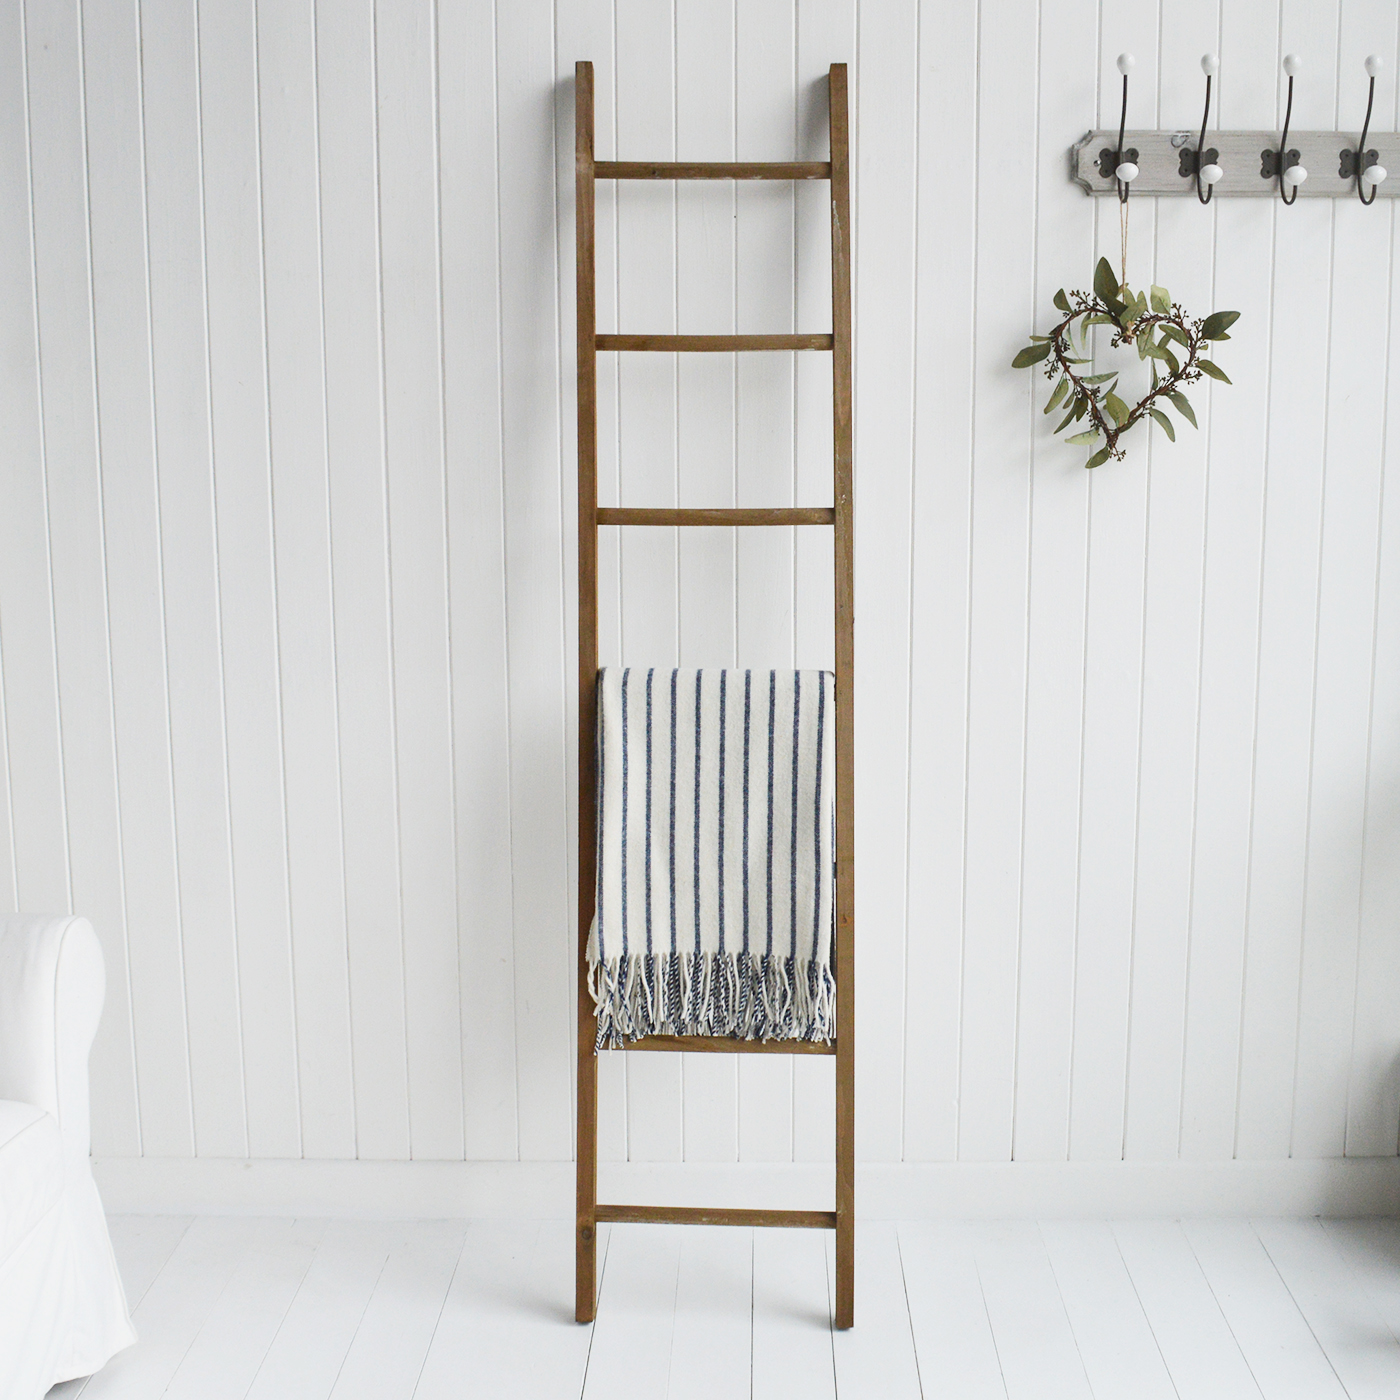 Oxford Blanket Ladder with the Sudbury Wool Throw for New Enland country and coastal furniture